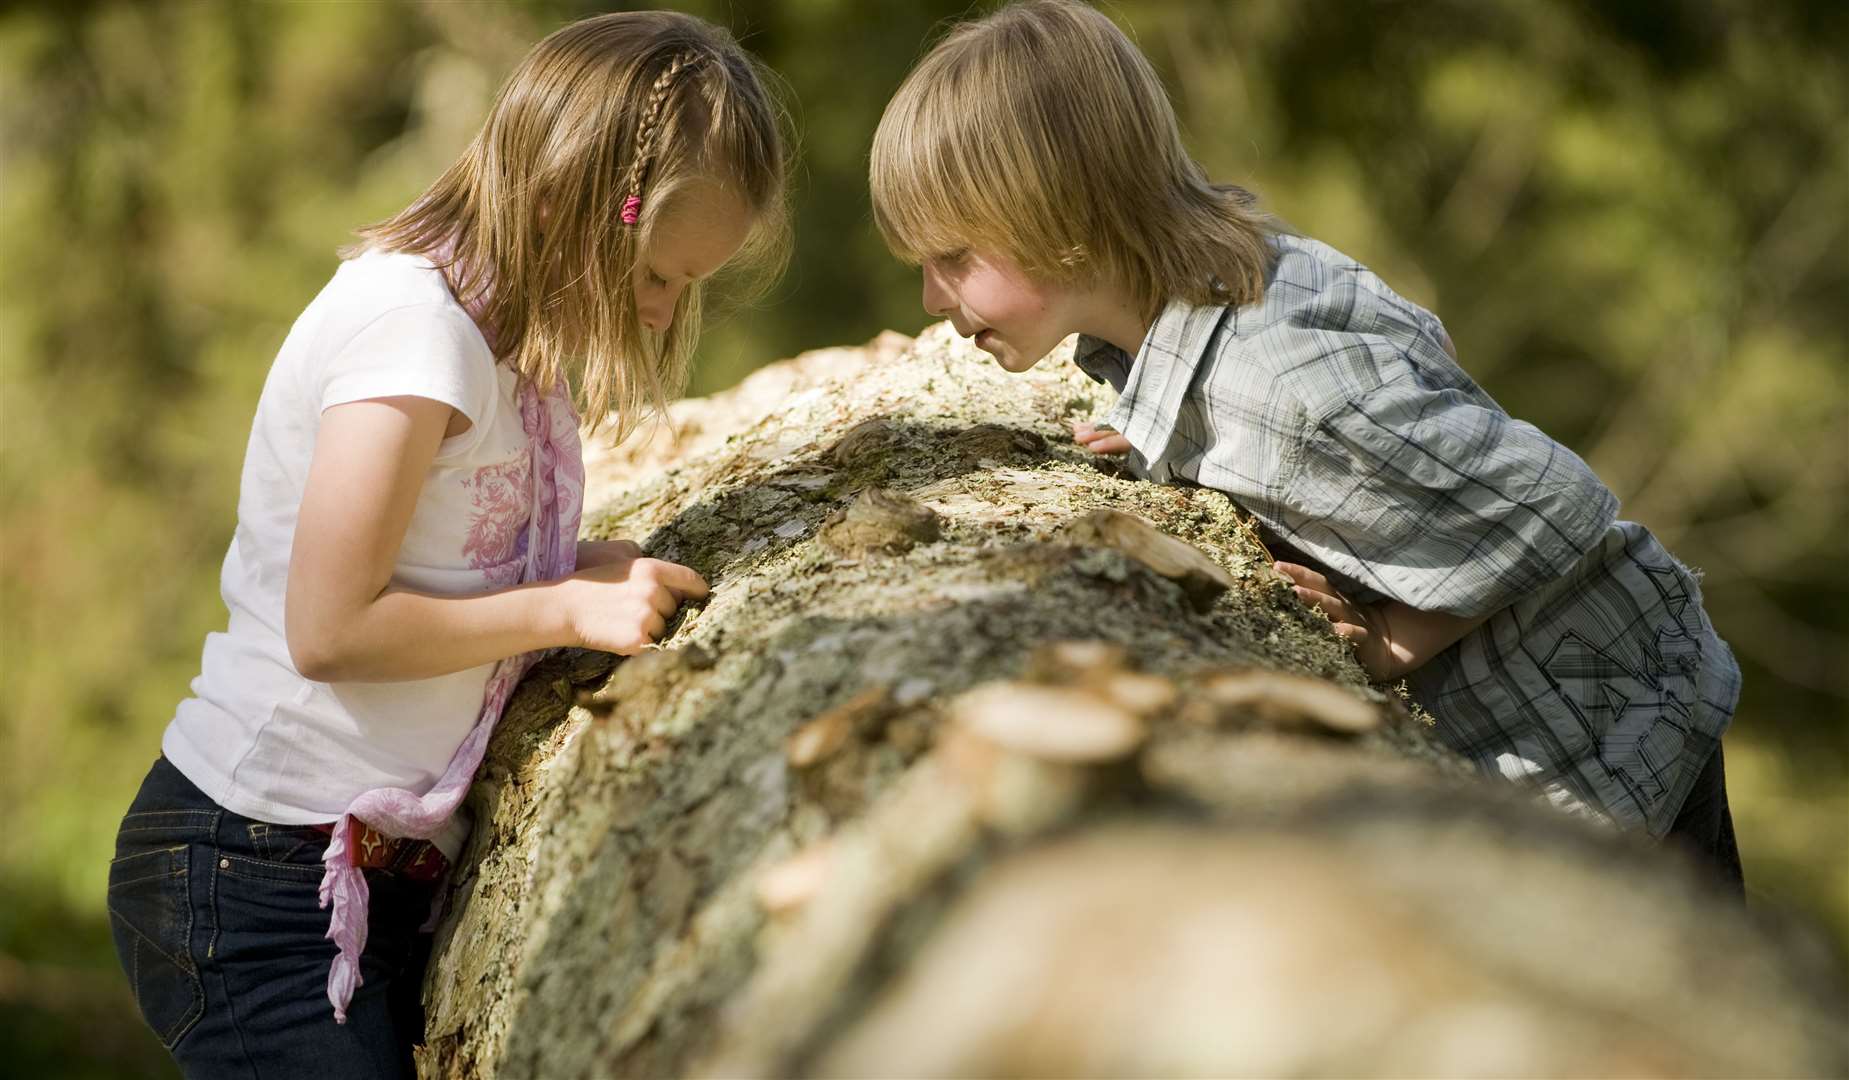 The National Trust has plenty of activities for families throughout the summer